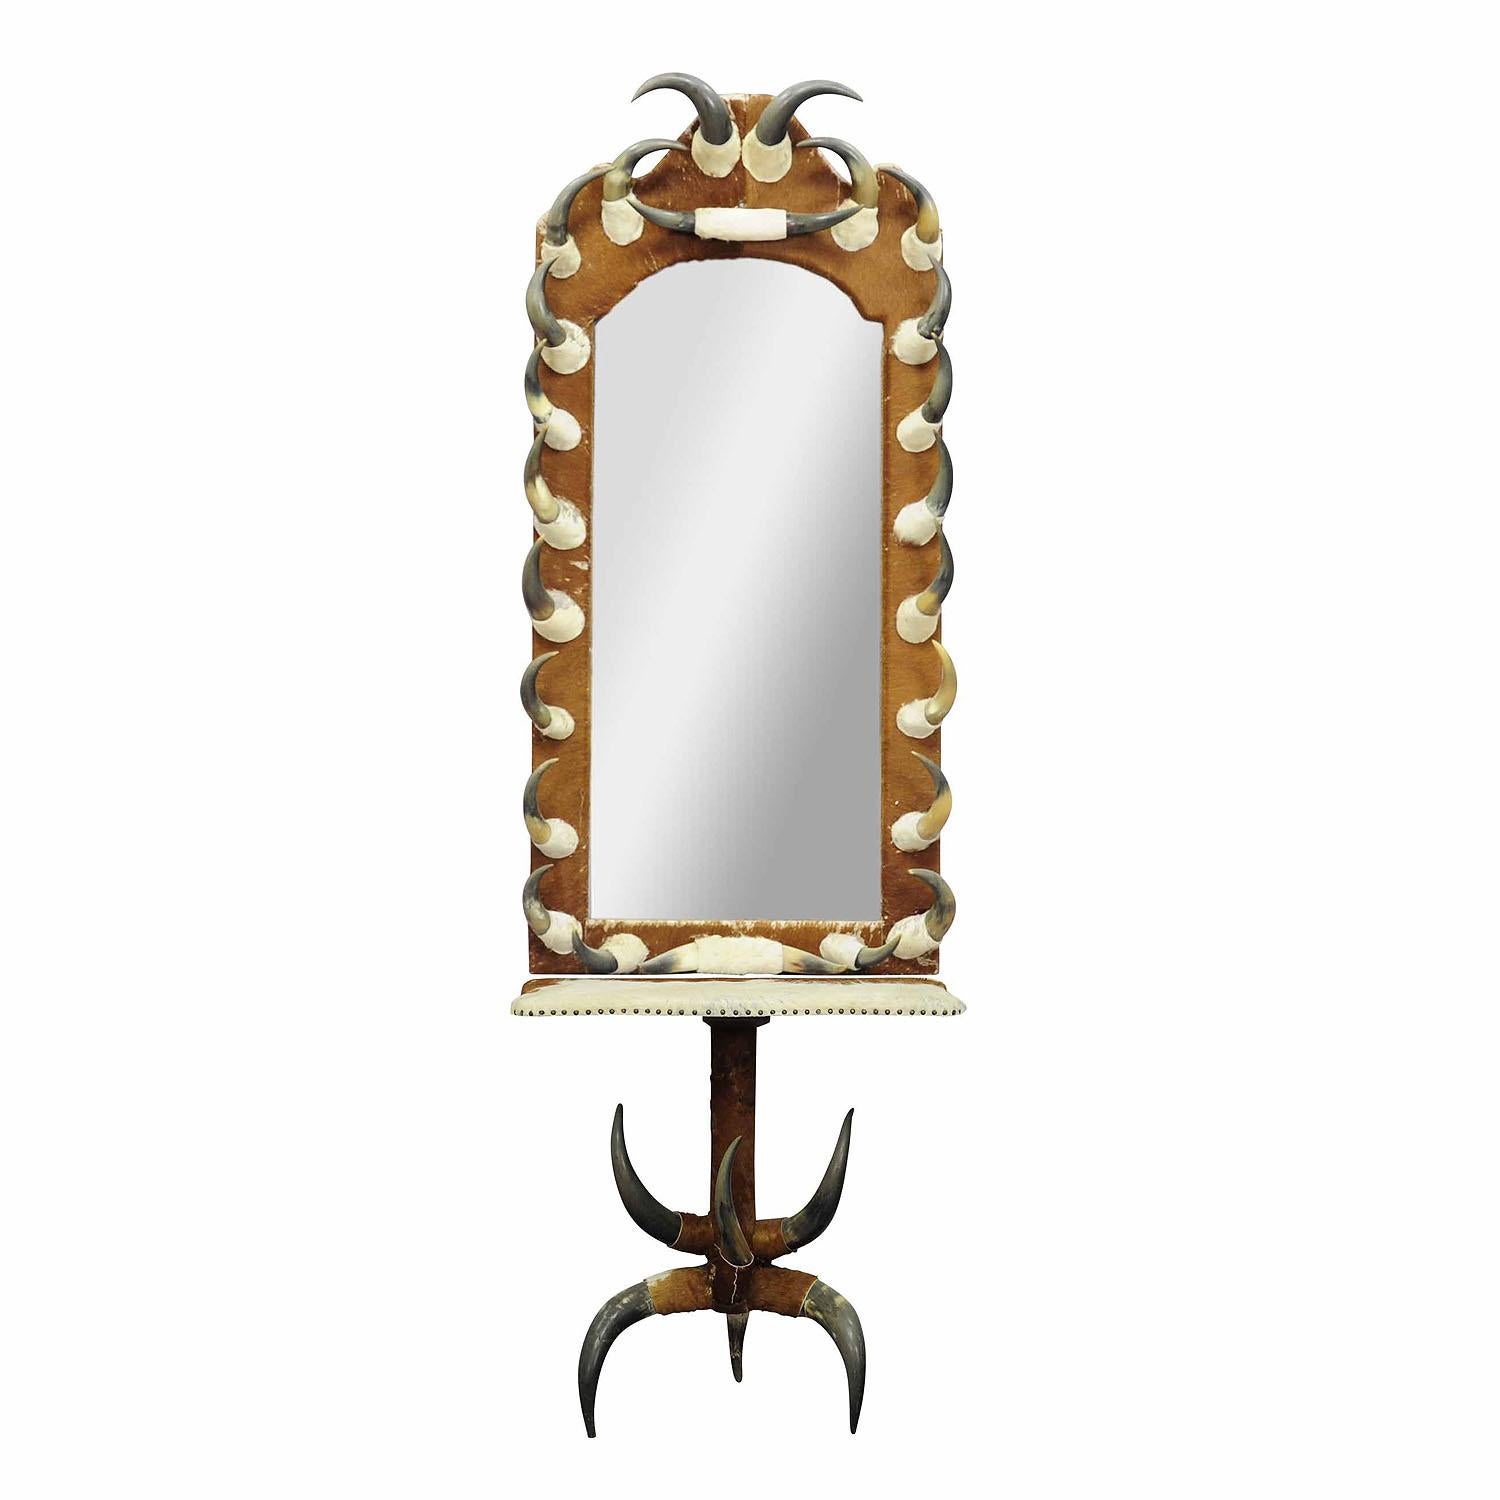 Large hall mirror with cow horn decorations and console table, Austria 1870

A great wall mirror with console table from a noble villa in the Austrian alps. Manufactured in Austria ca. 1870s. The mirror is covered with vintage cow fur and decorated